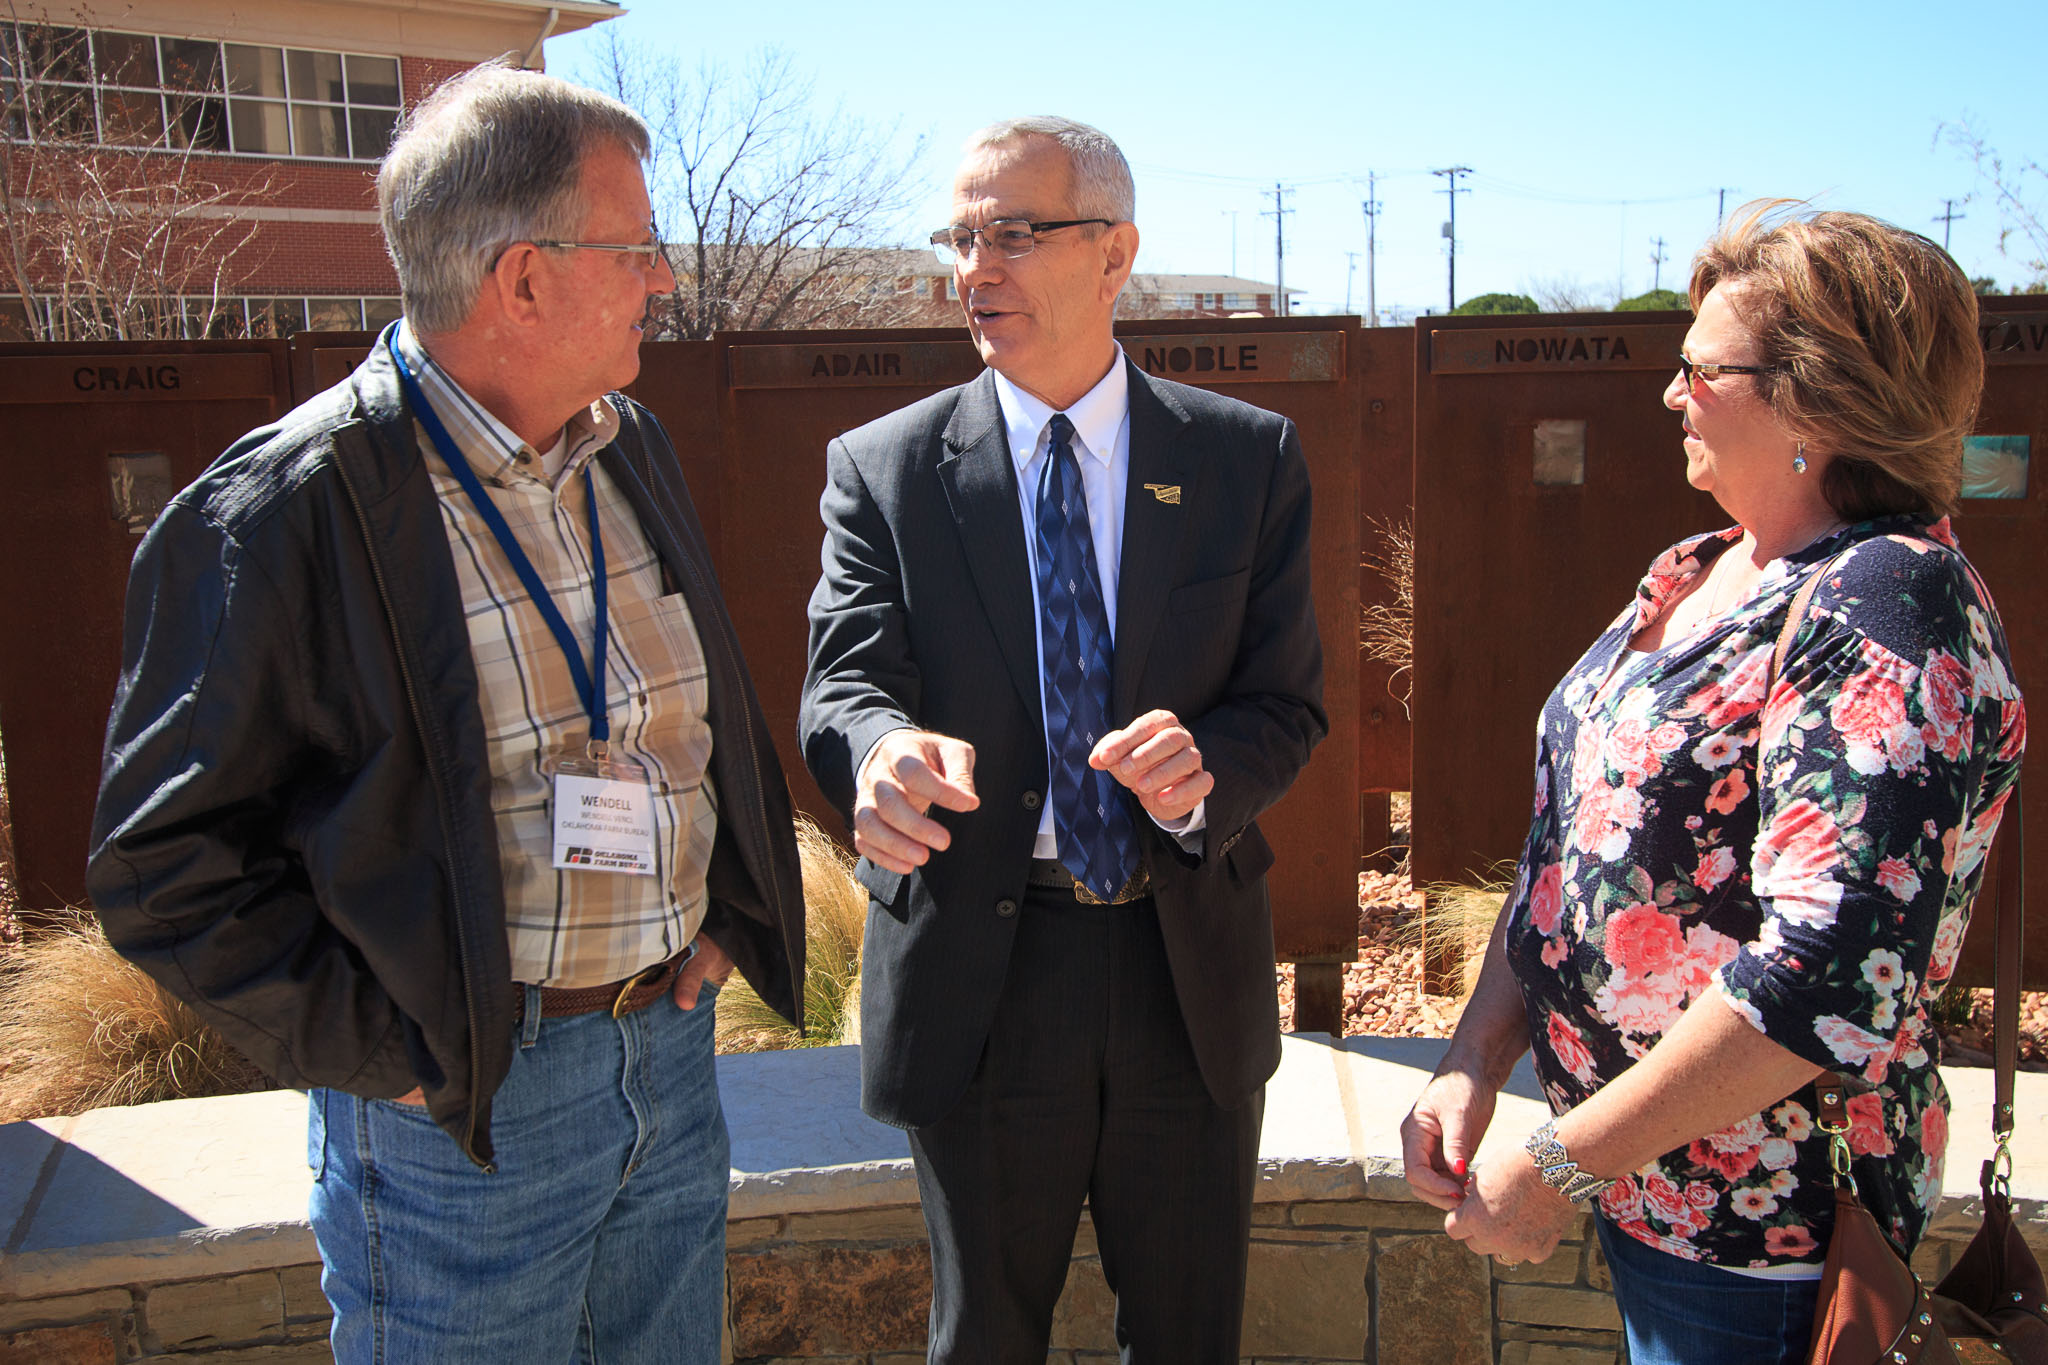 Oklahoma Secretary of Agriculture Jim Reese (center) visits with Farm Bureau members during the commemorative courtyard dedication on March 7, 2017.